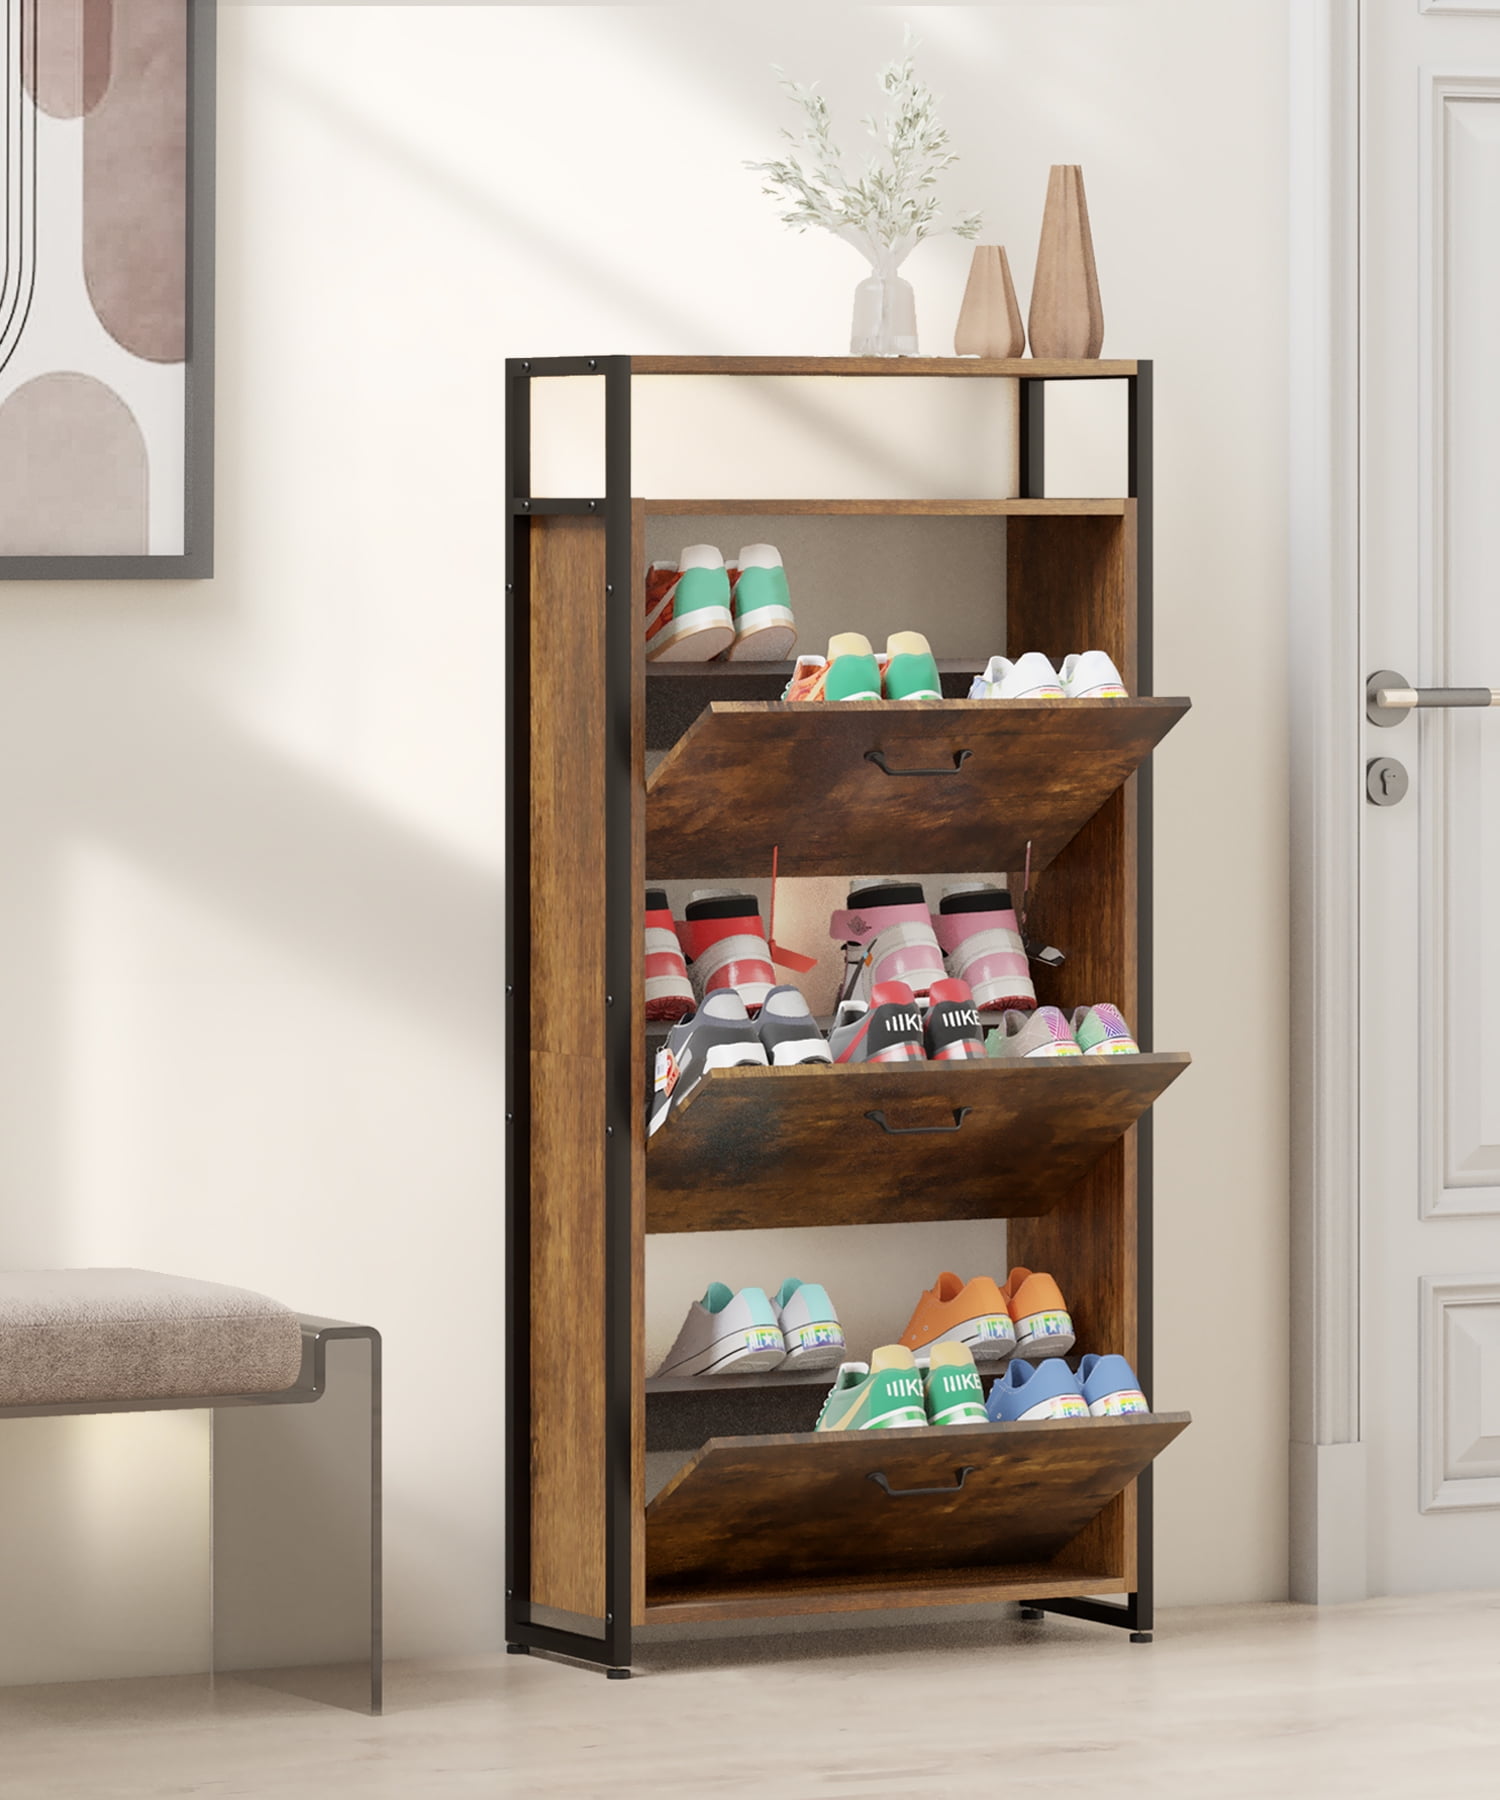 Wood Shoe Shelf Storage Organizer Hanging Bar Entryway Shoe Rack, Home Shelf  Storage Cabinet for Shoes, Books and Flowerpots Natural